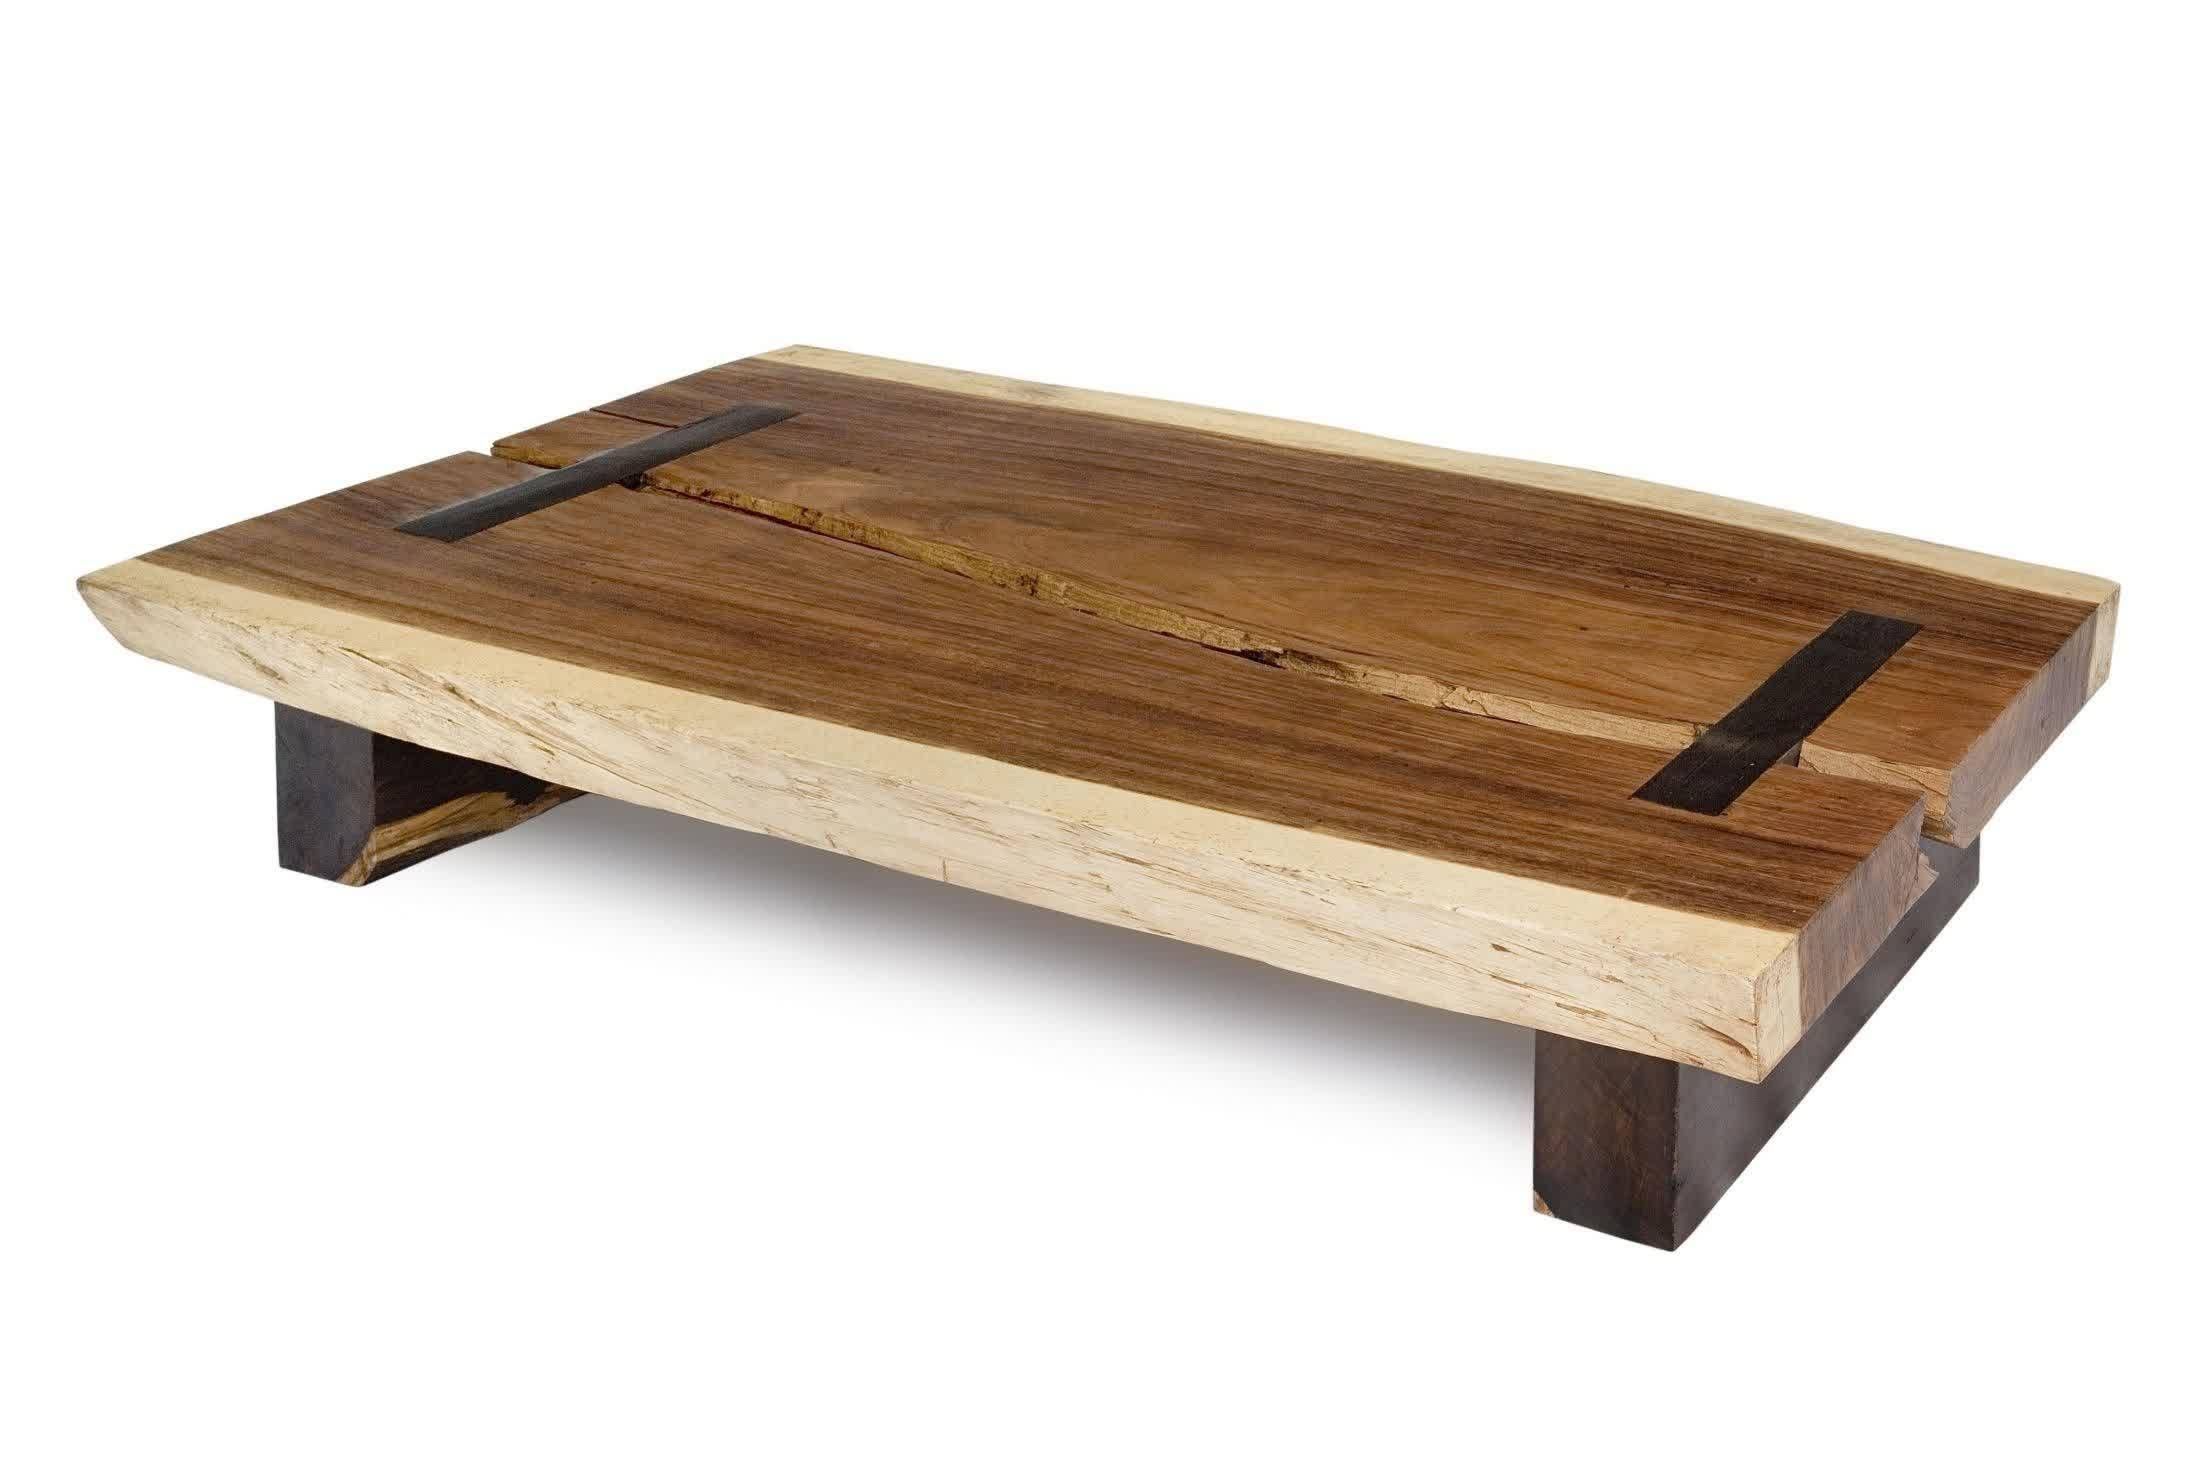 Perfect Low Coffee Table – Low Coffee Table Height, Low Level Regarding Large Low Wood Coffee Tables (View 1 of 30)